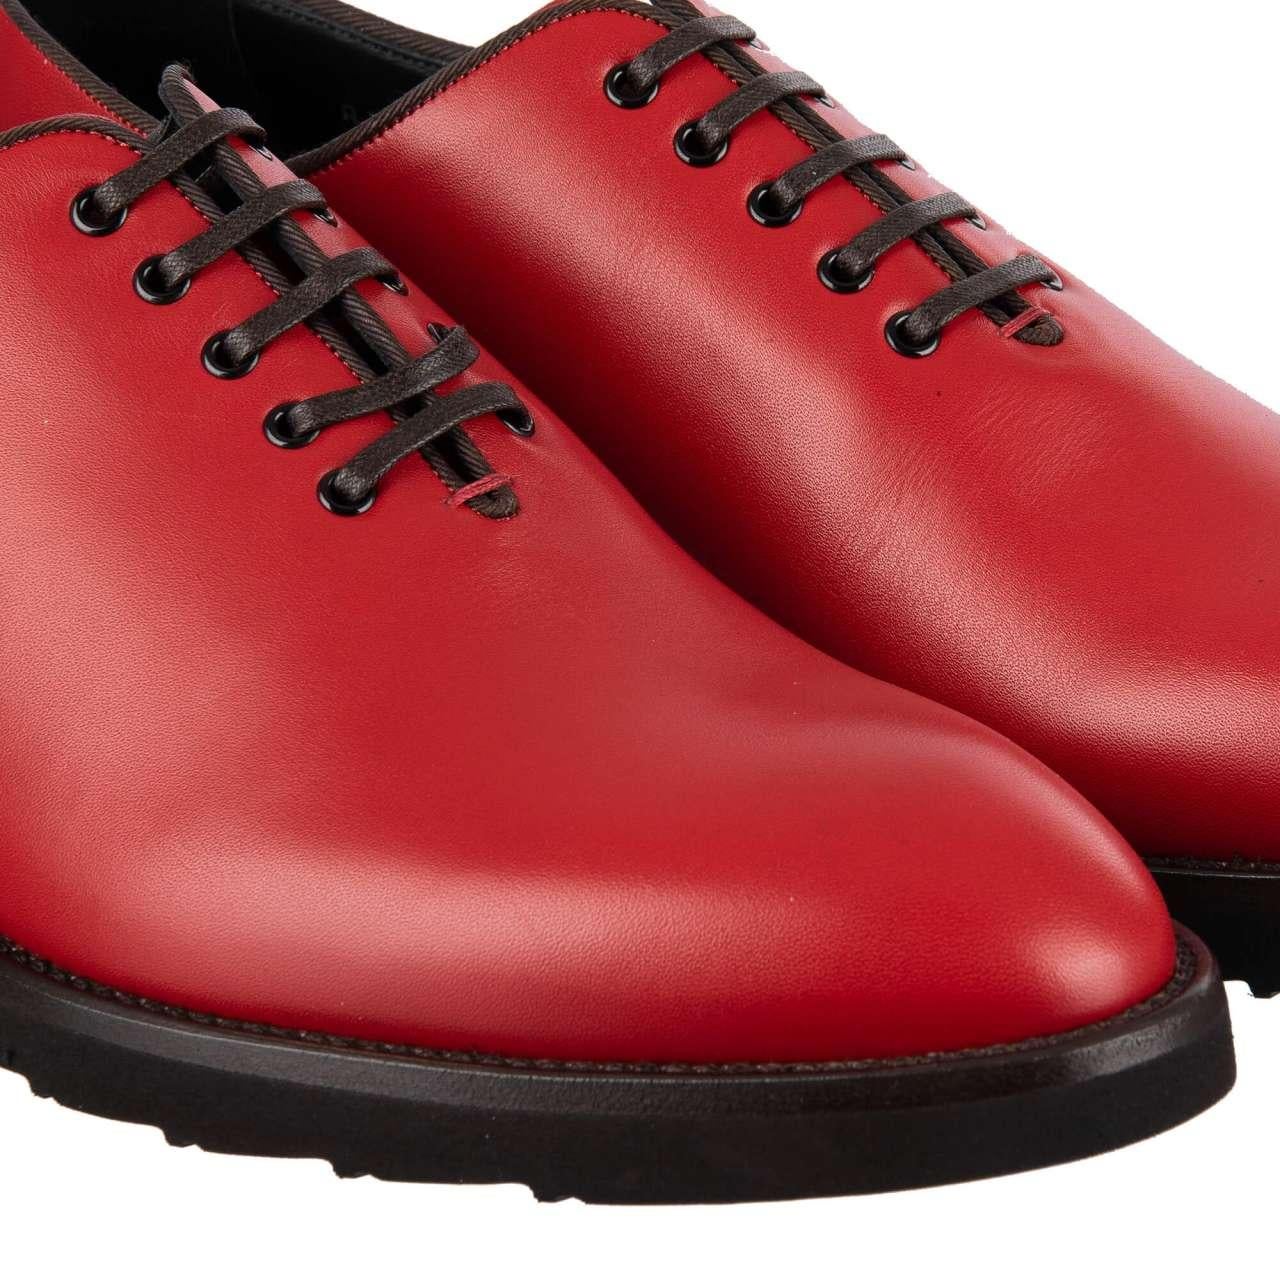 Dolce & Gabbana - Leather Oxford Shoes SICILIA Red EUR 43 In Excellent Condition For Sale In Erkrath, DE